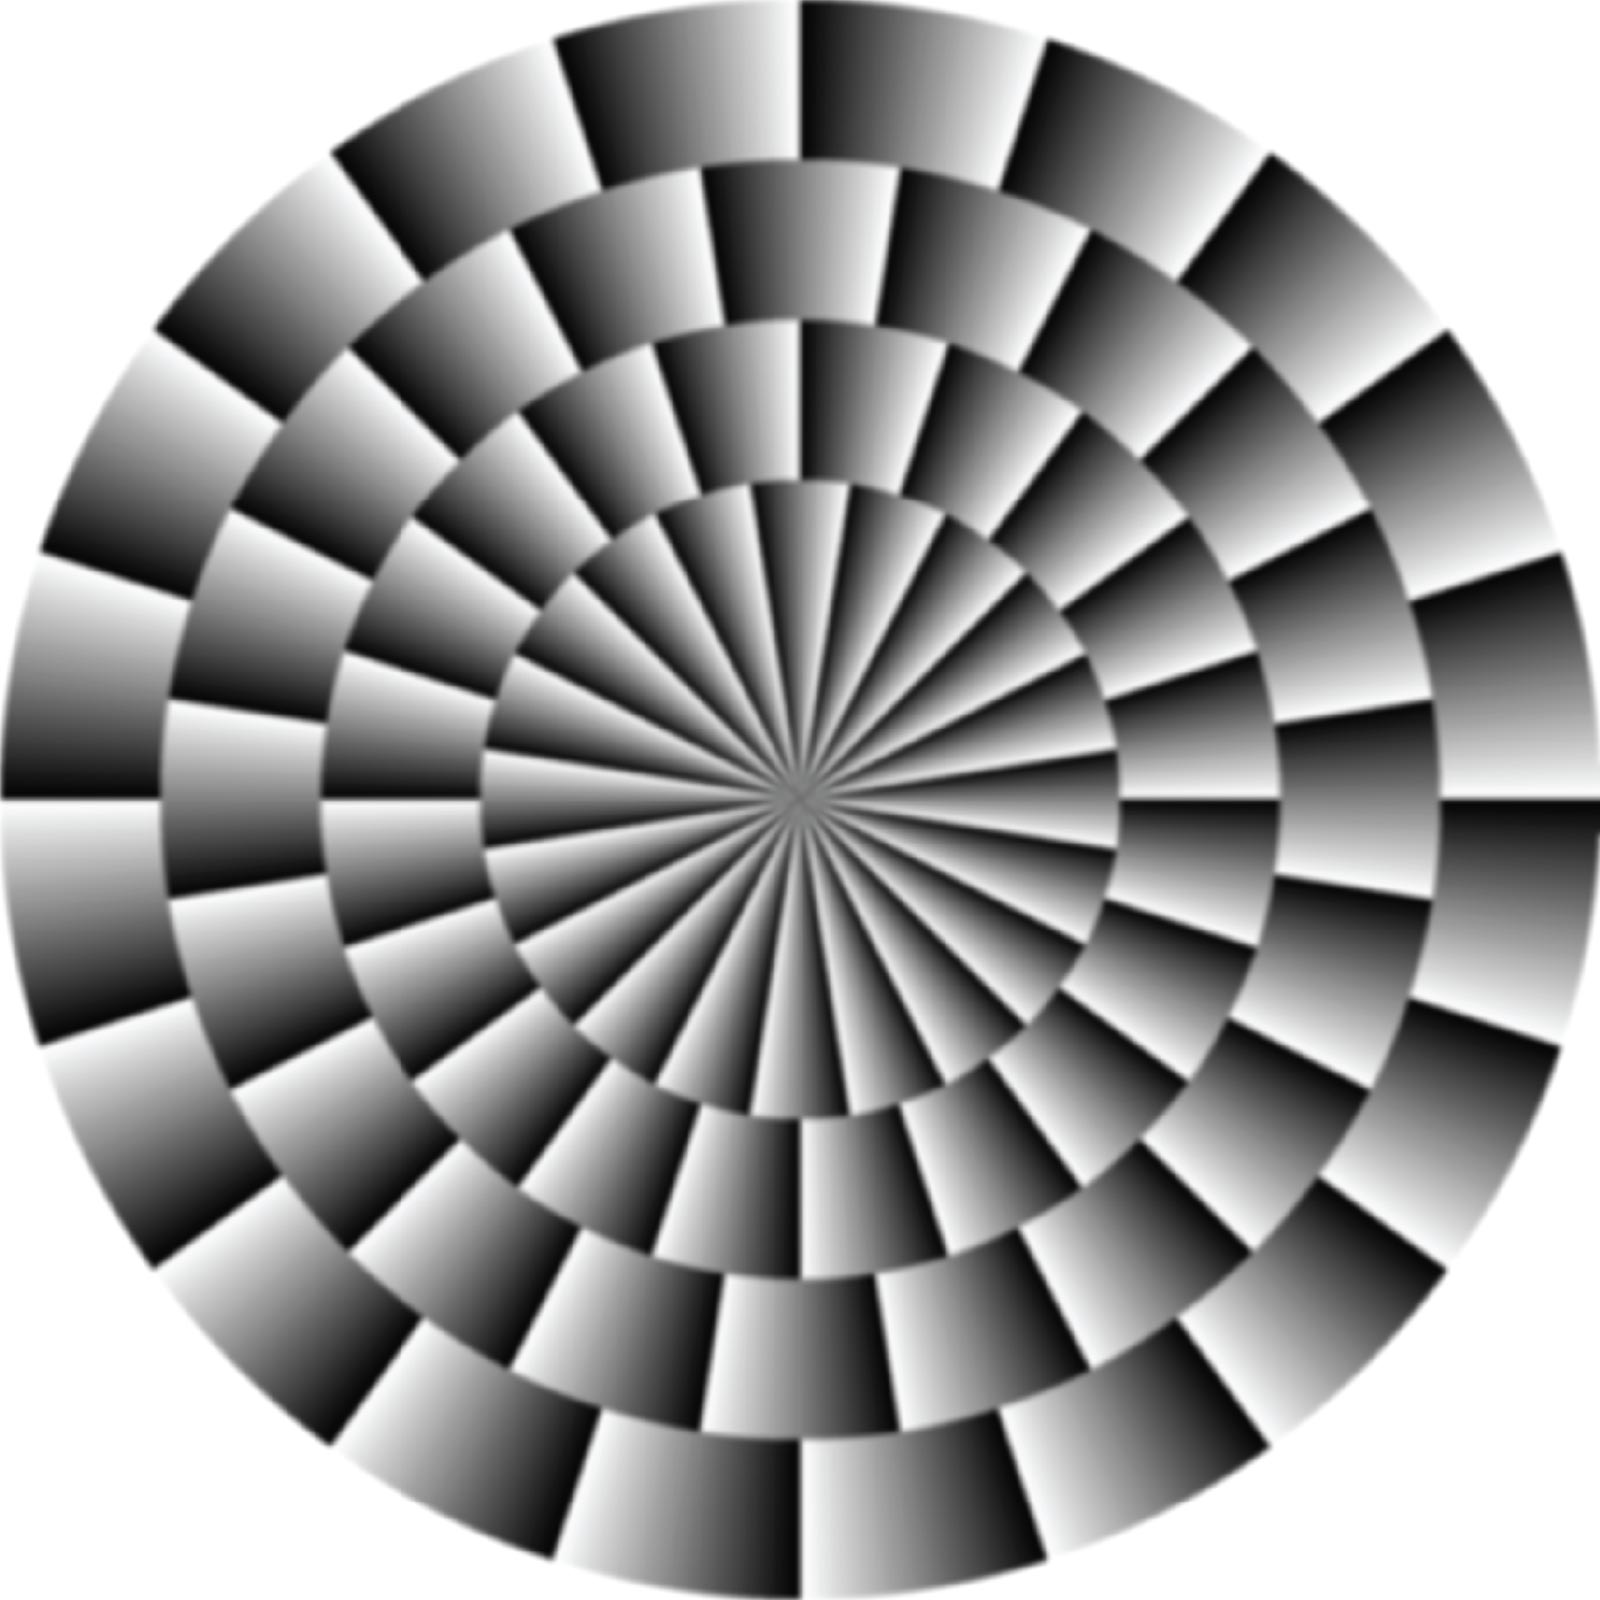 Scientists Find a Neurological Synergy in Explaining the Processing of a  Common Optical Illusion